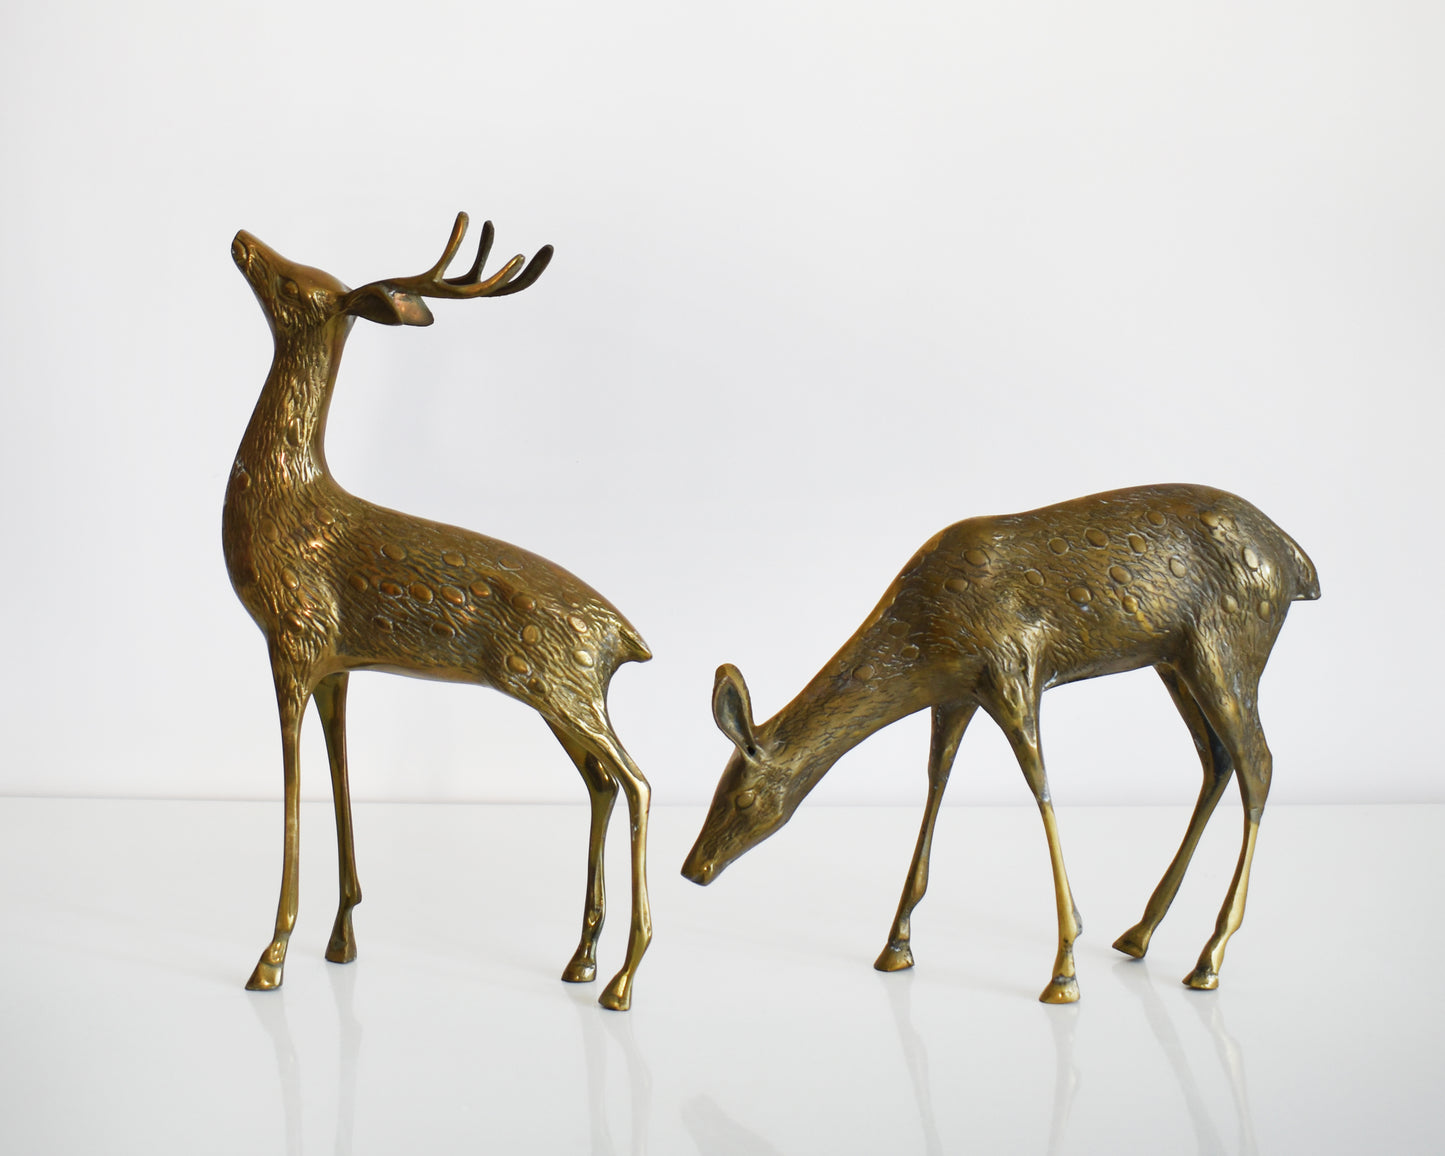 Two vintage brass deers standing on a white table and white background. The buck is standing upright displaying his antlers and the doe is grazing on the ground. Both of the deer have excellent fur and spotted detail.